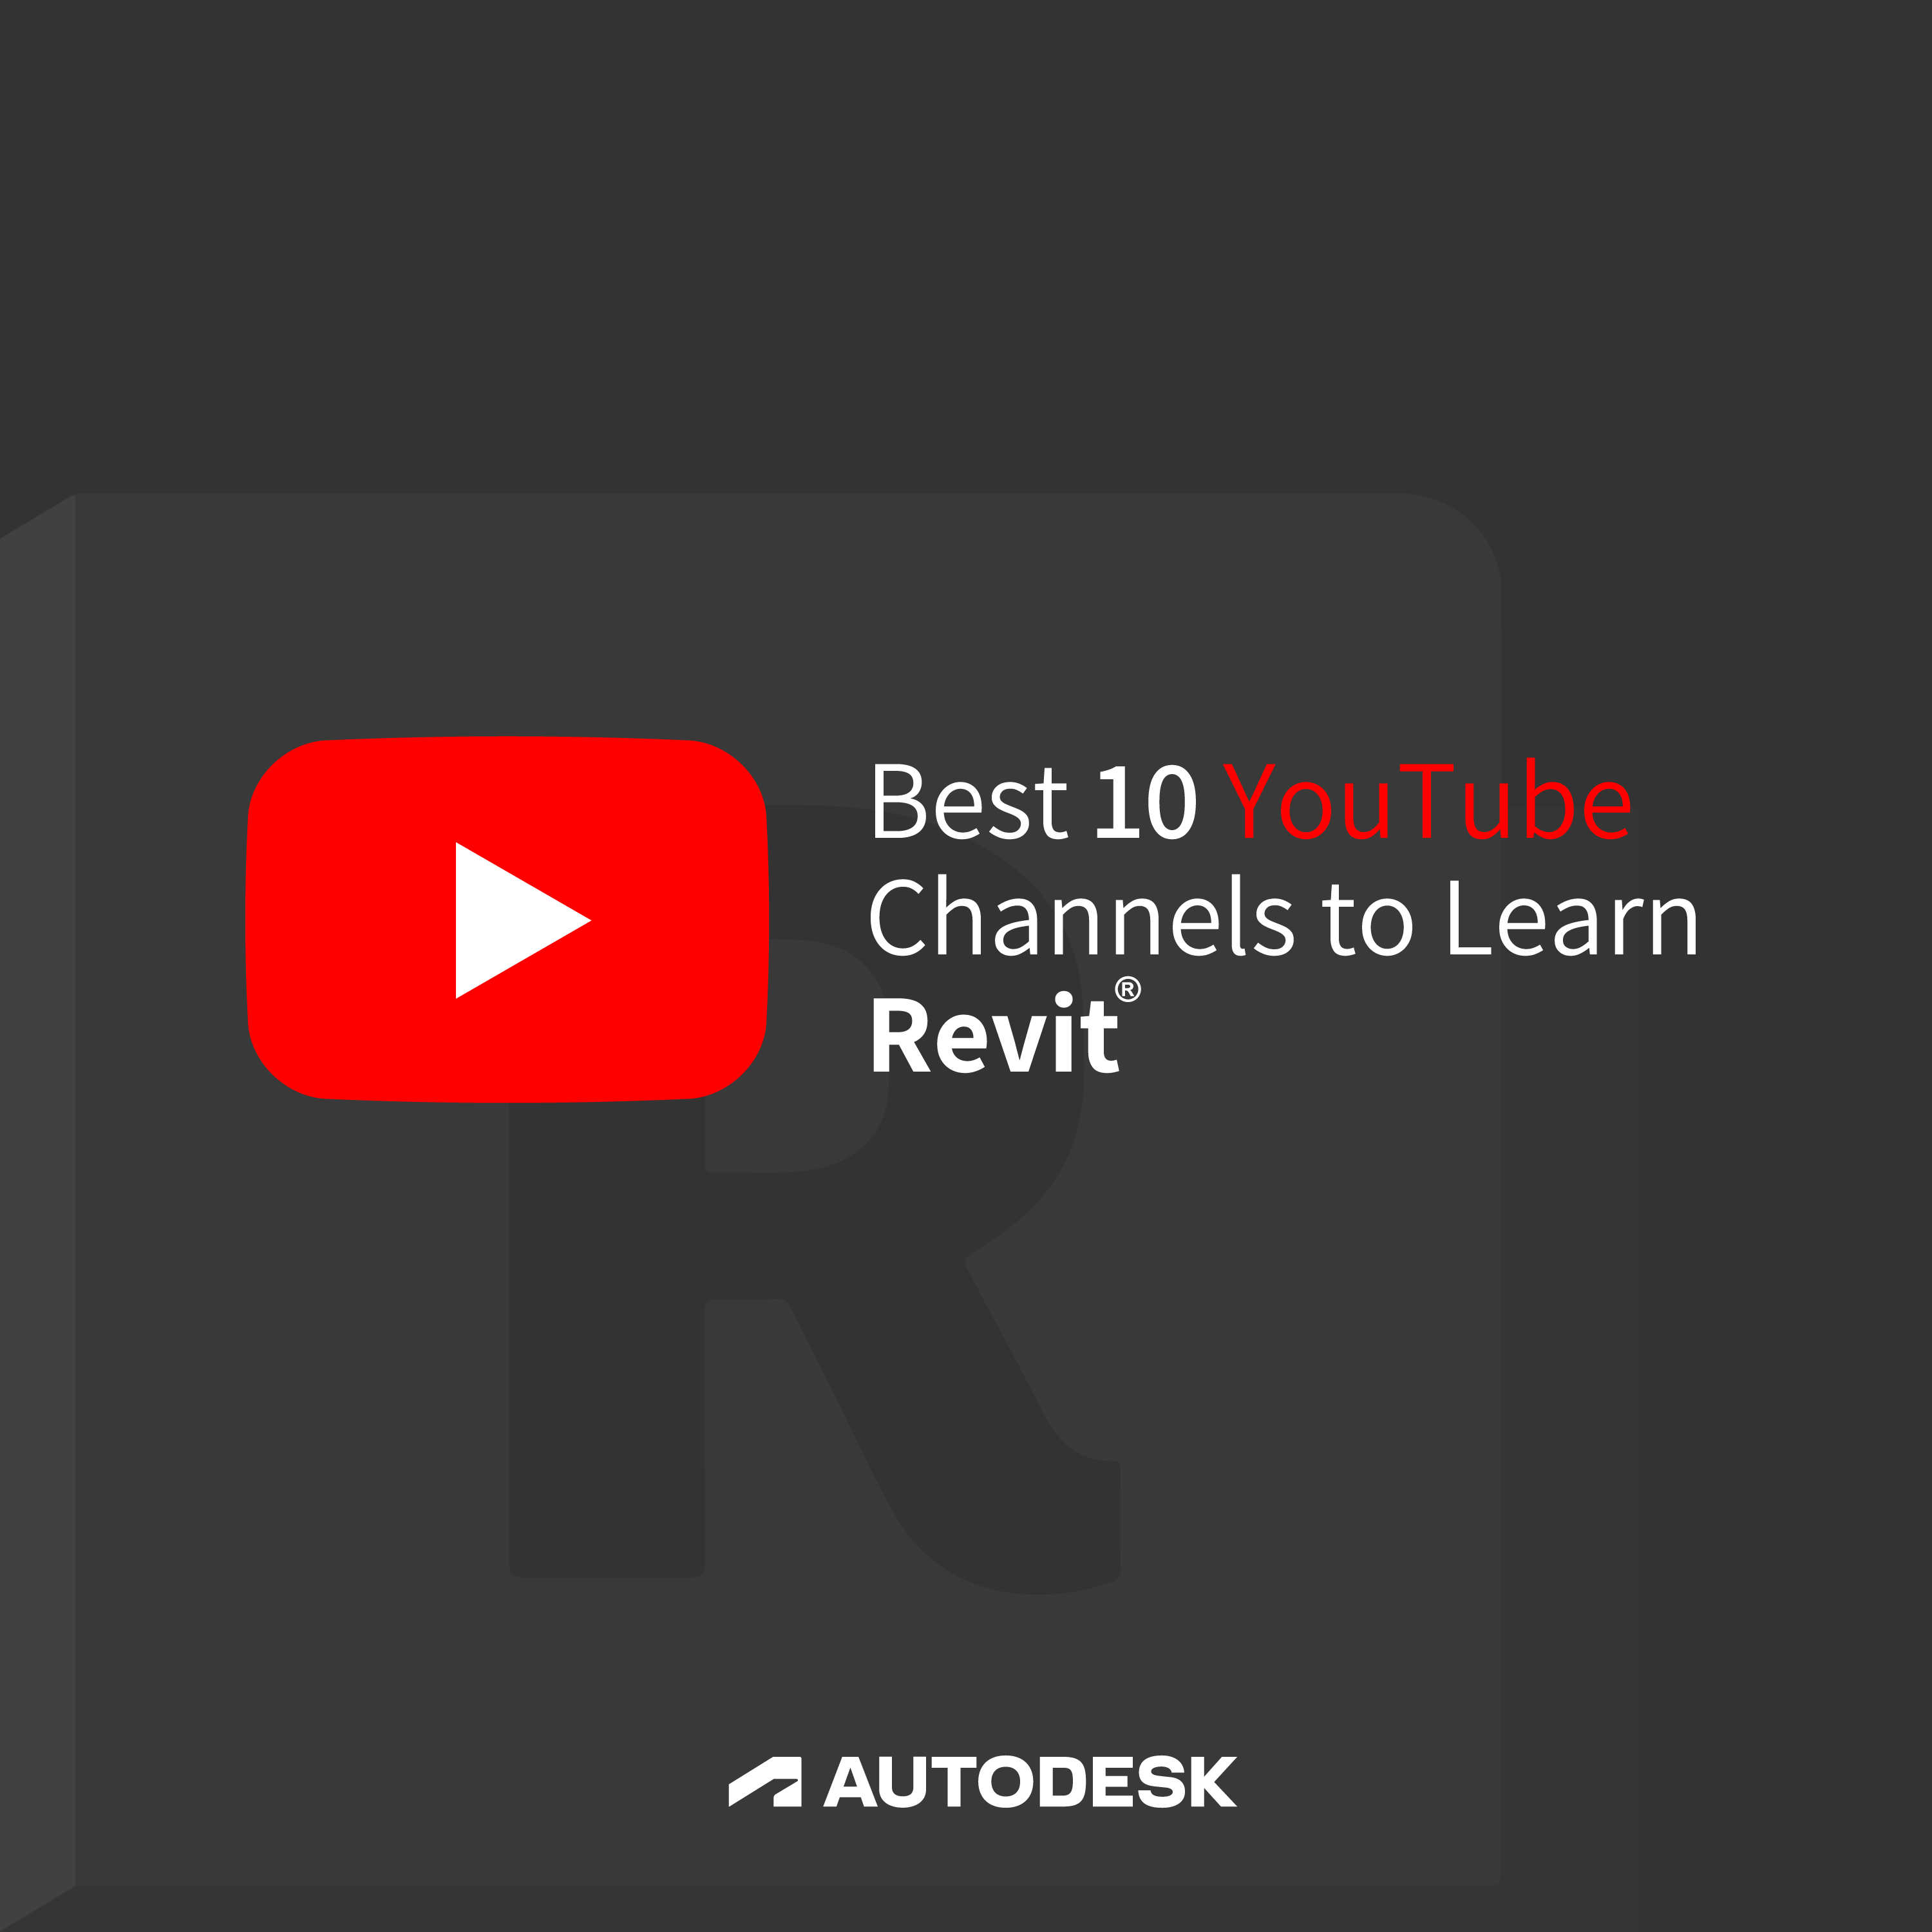 Top YouTube Channels to learn Revit